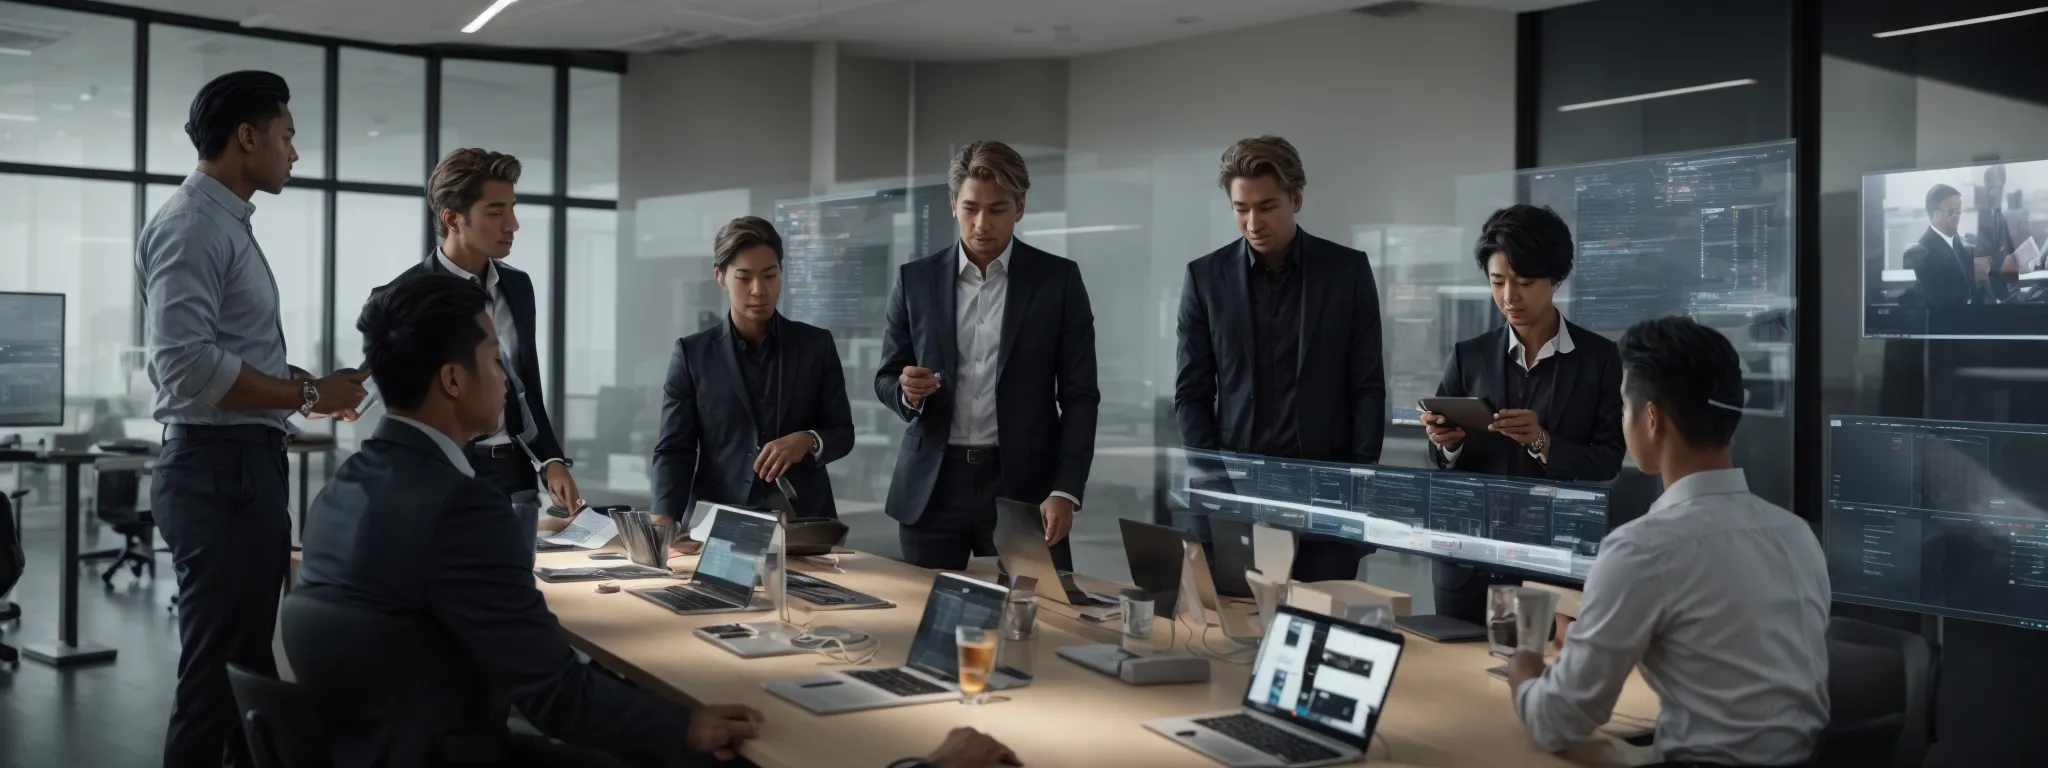 a group of professionals collaborating efficiently around a sleek, high-tech digital workspace while engaging with an interactive agile management app on a large touchscreen display.